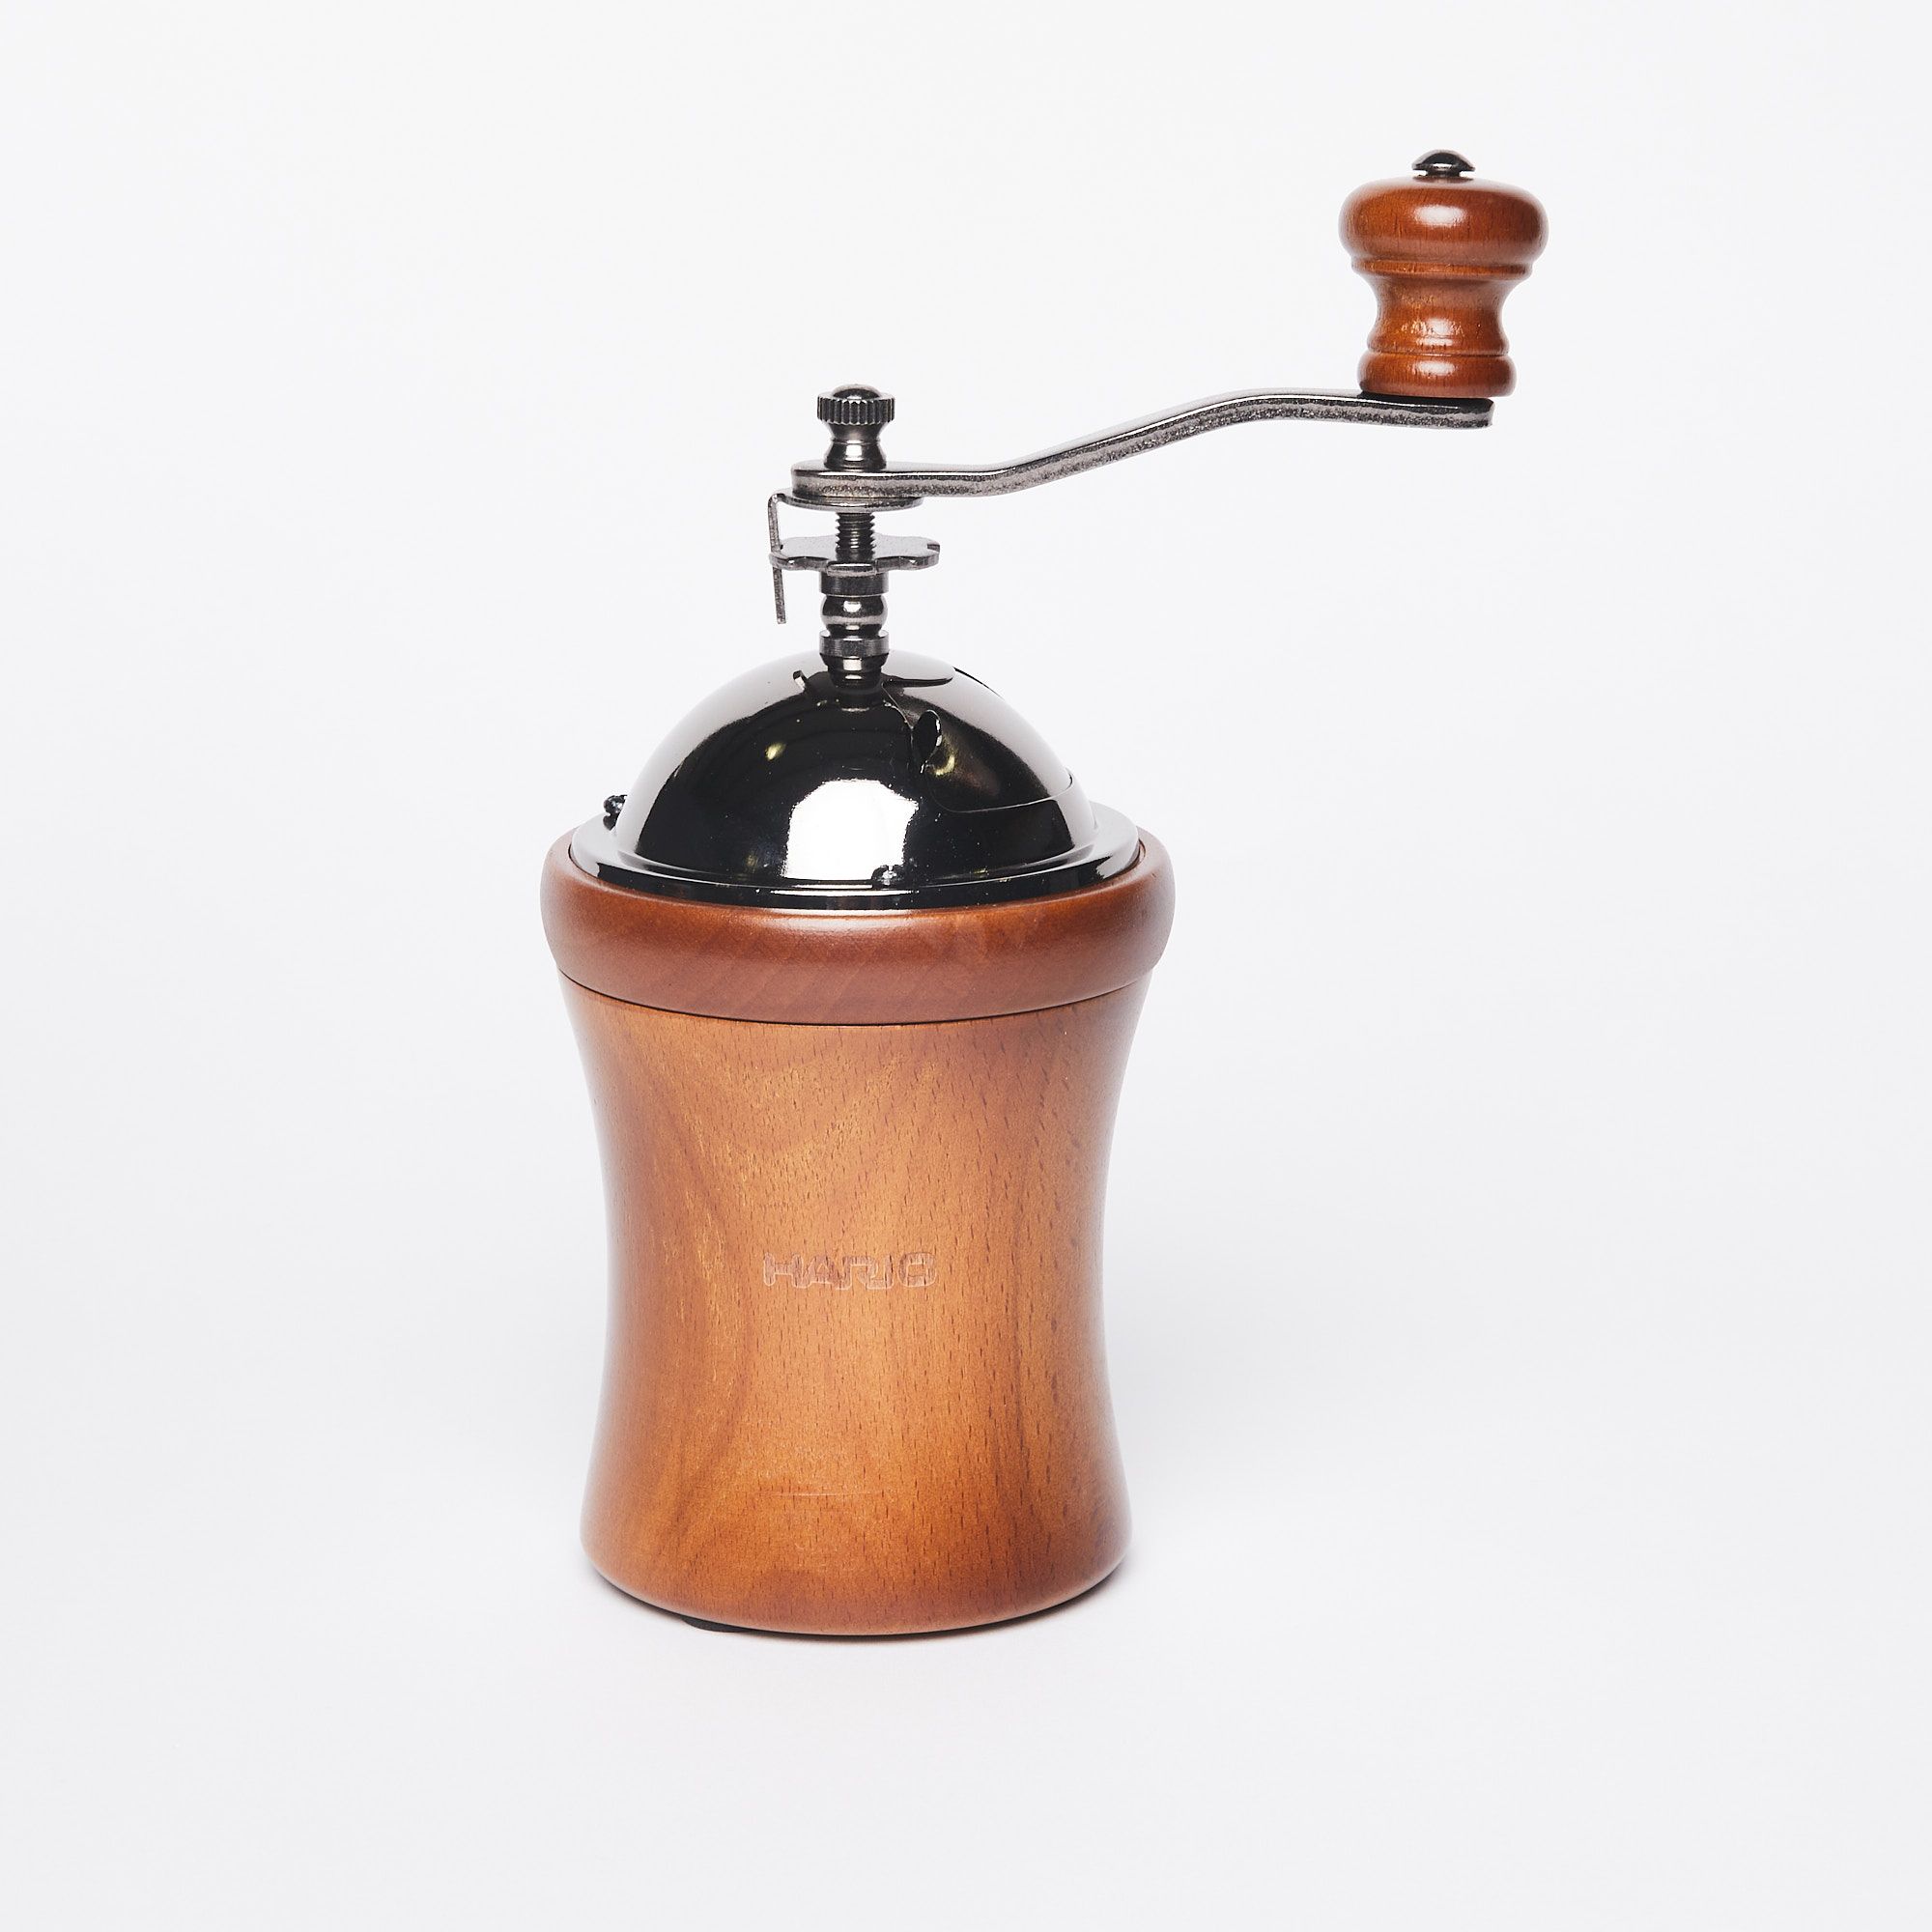 Wide hourglass shaped wood base with metal domed top and handle with a wood knob